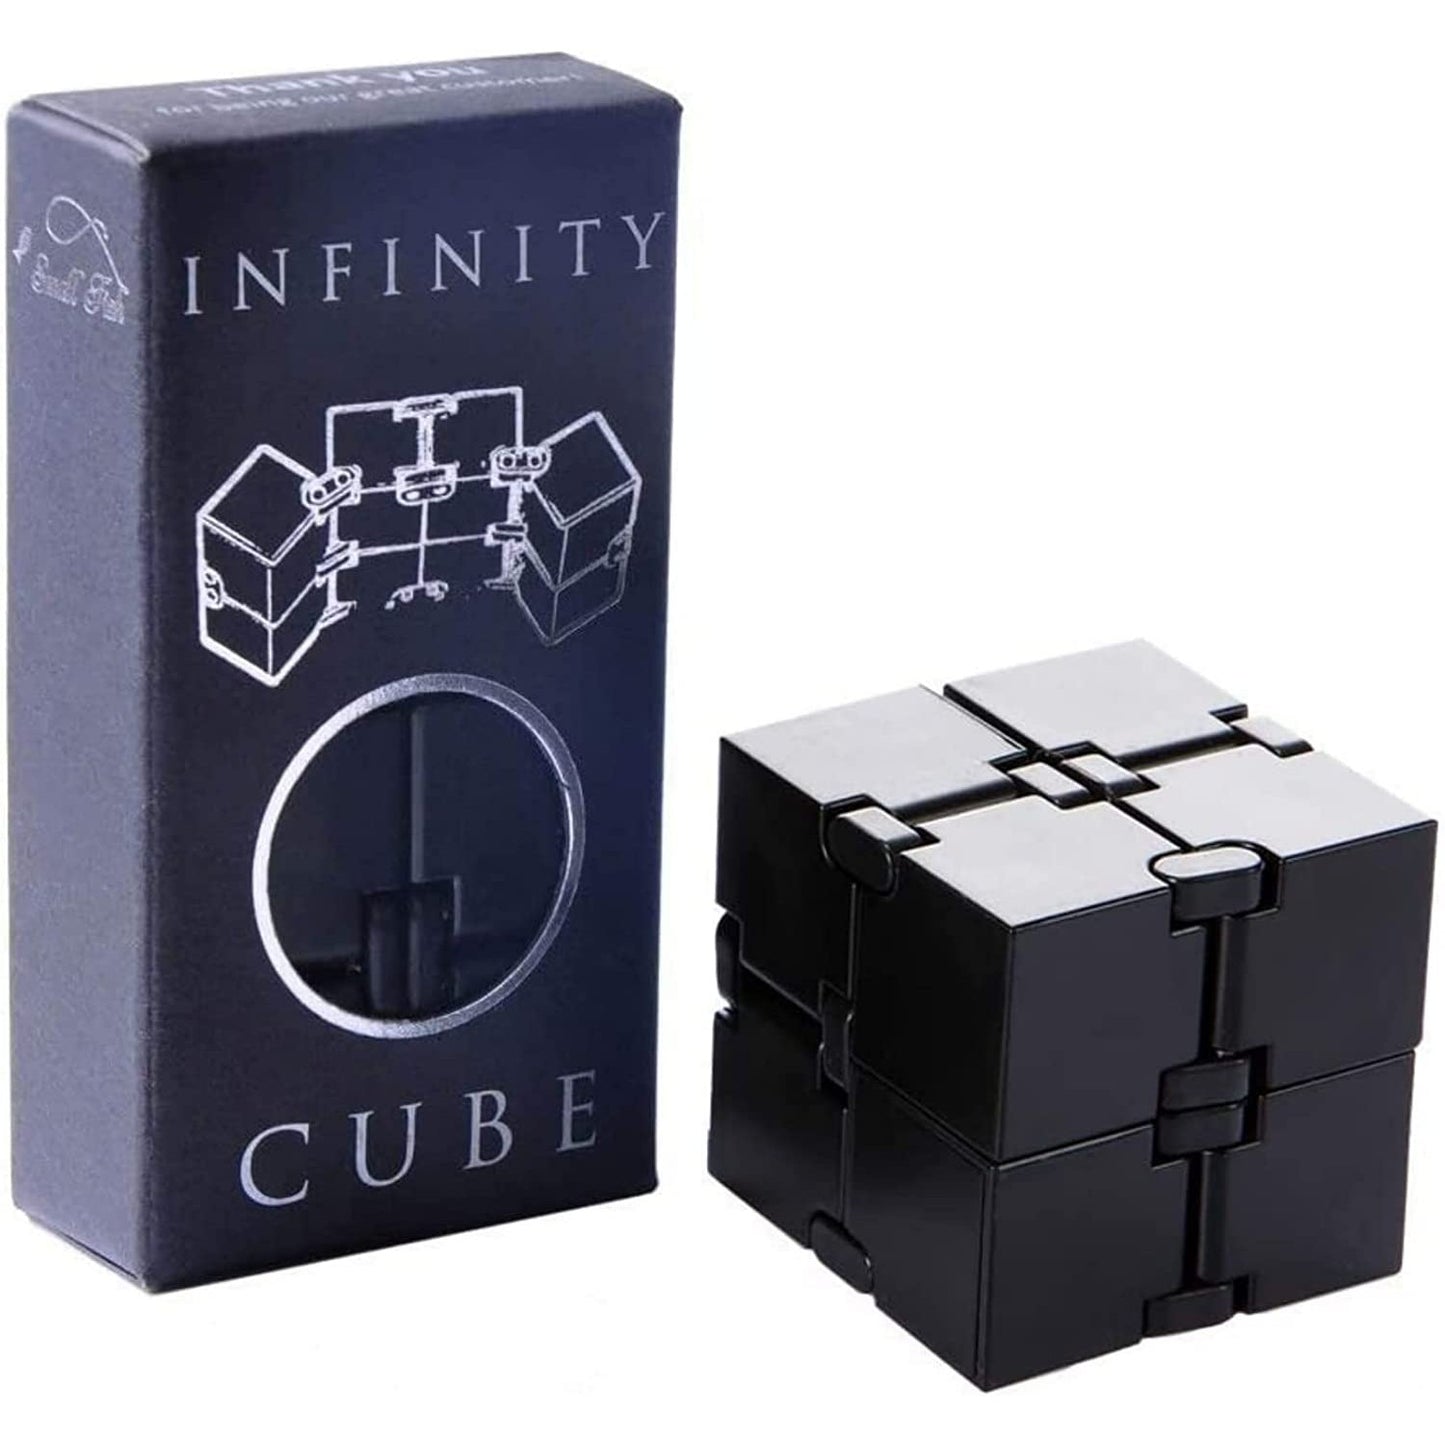 A black infinity fidget cube next to the packaging that the cube comes in. The text on the packaging says, "infinity cube"